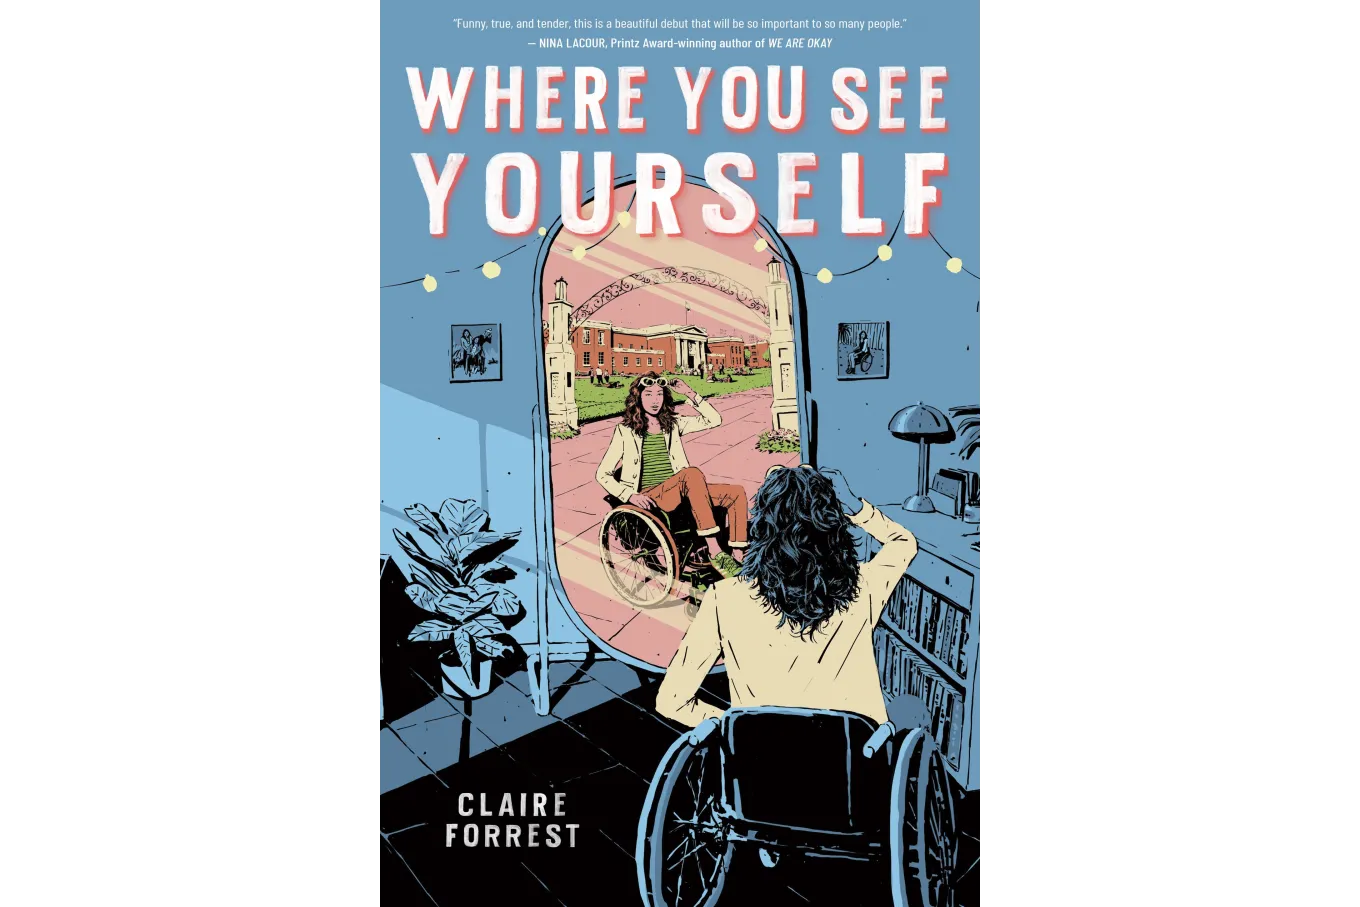 Cover of Where You See Yourself